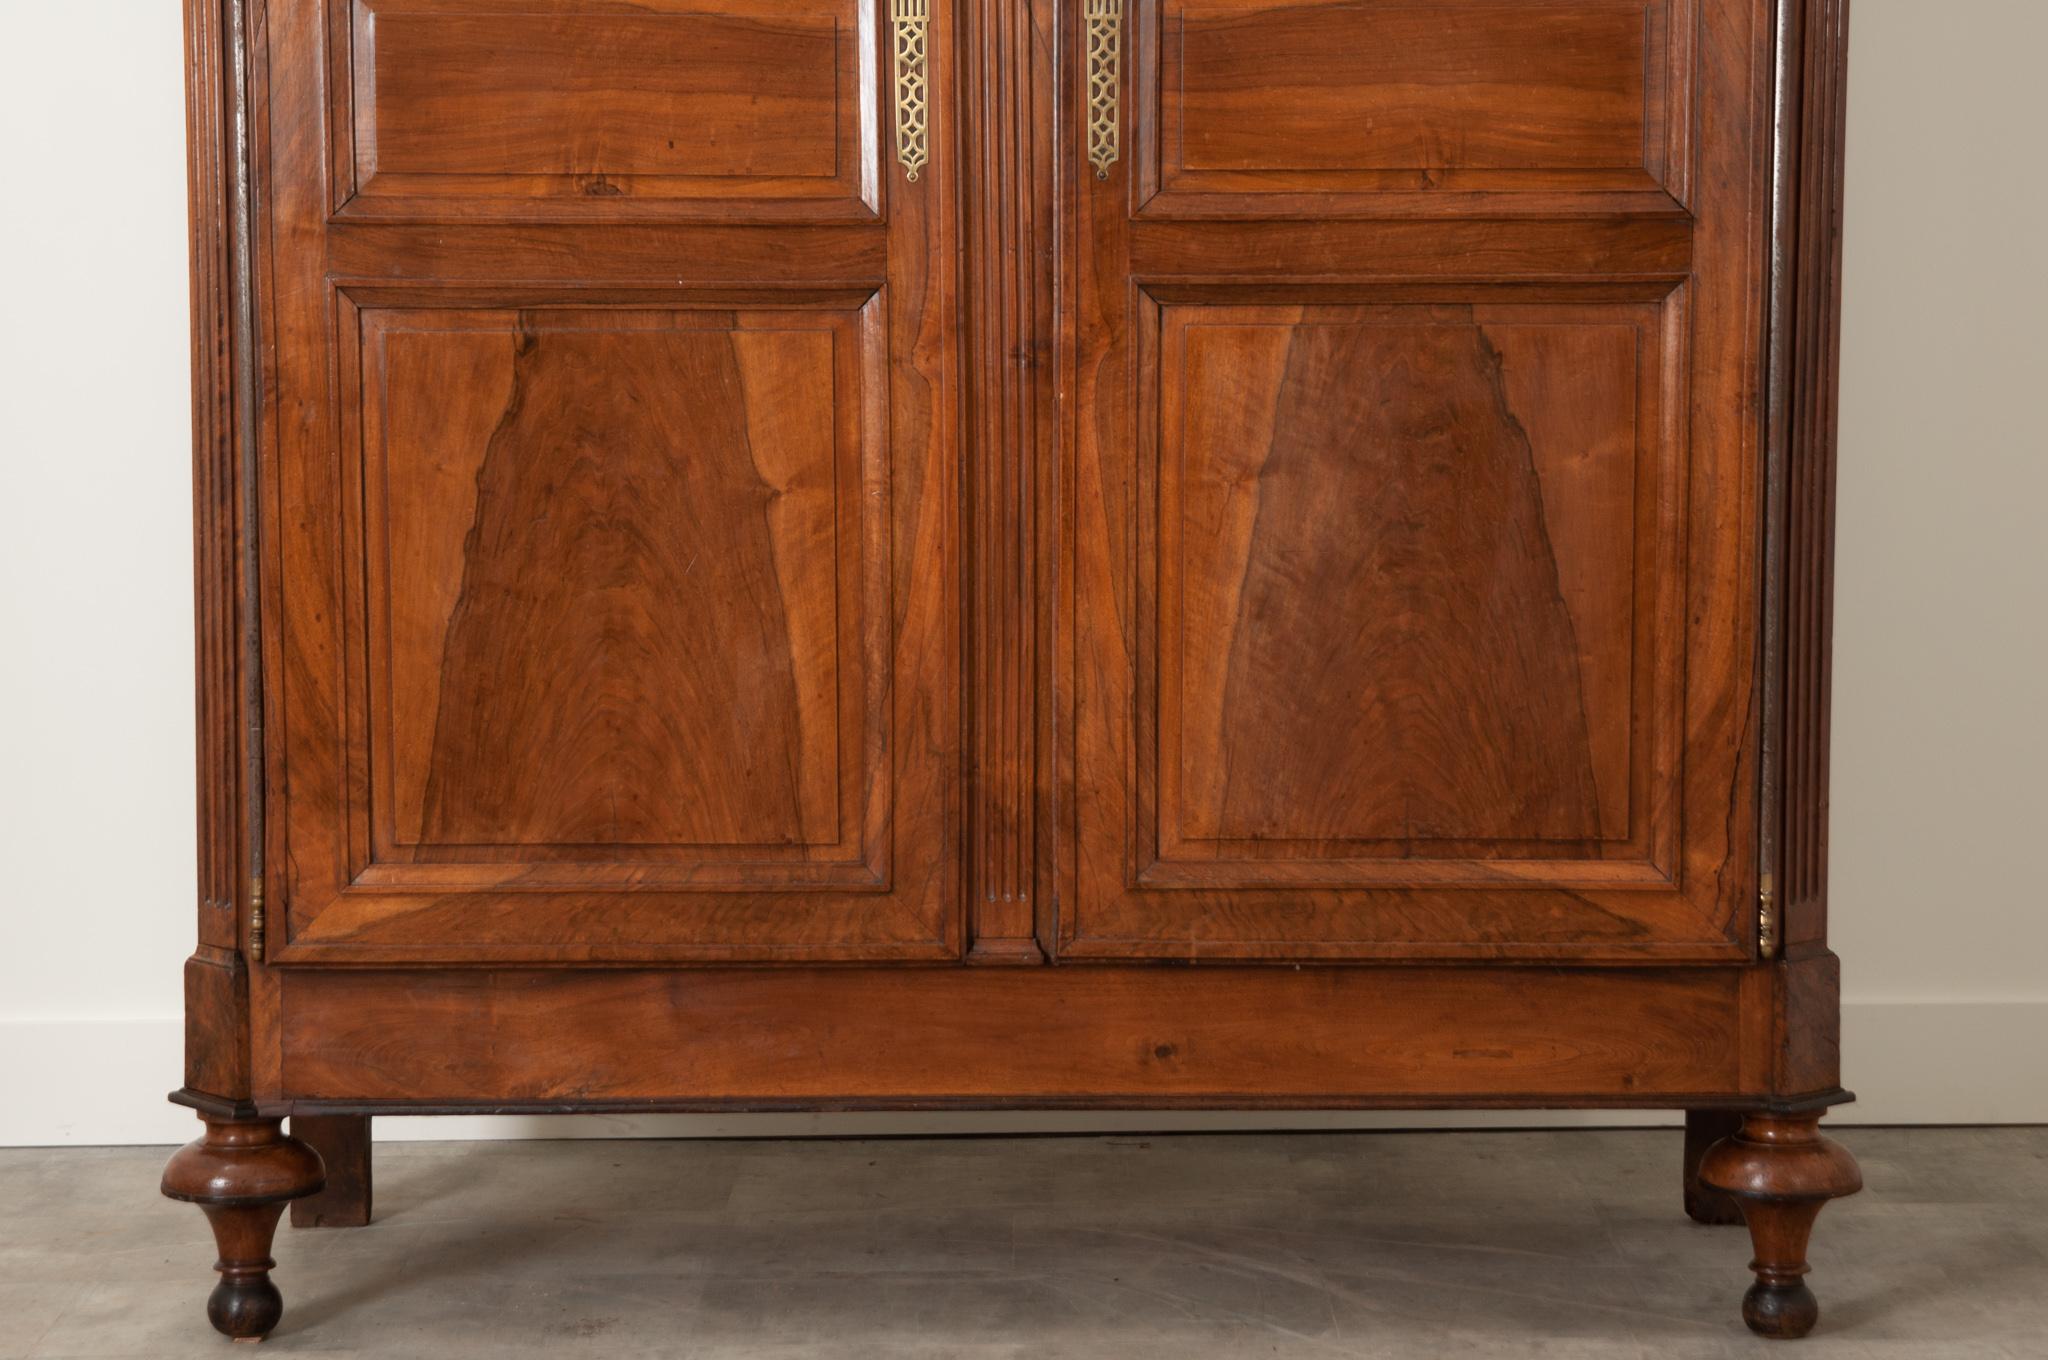 Rustic French Early 19th Century Solid Walnut Armoire